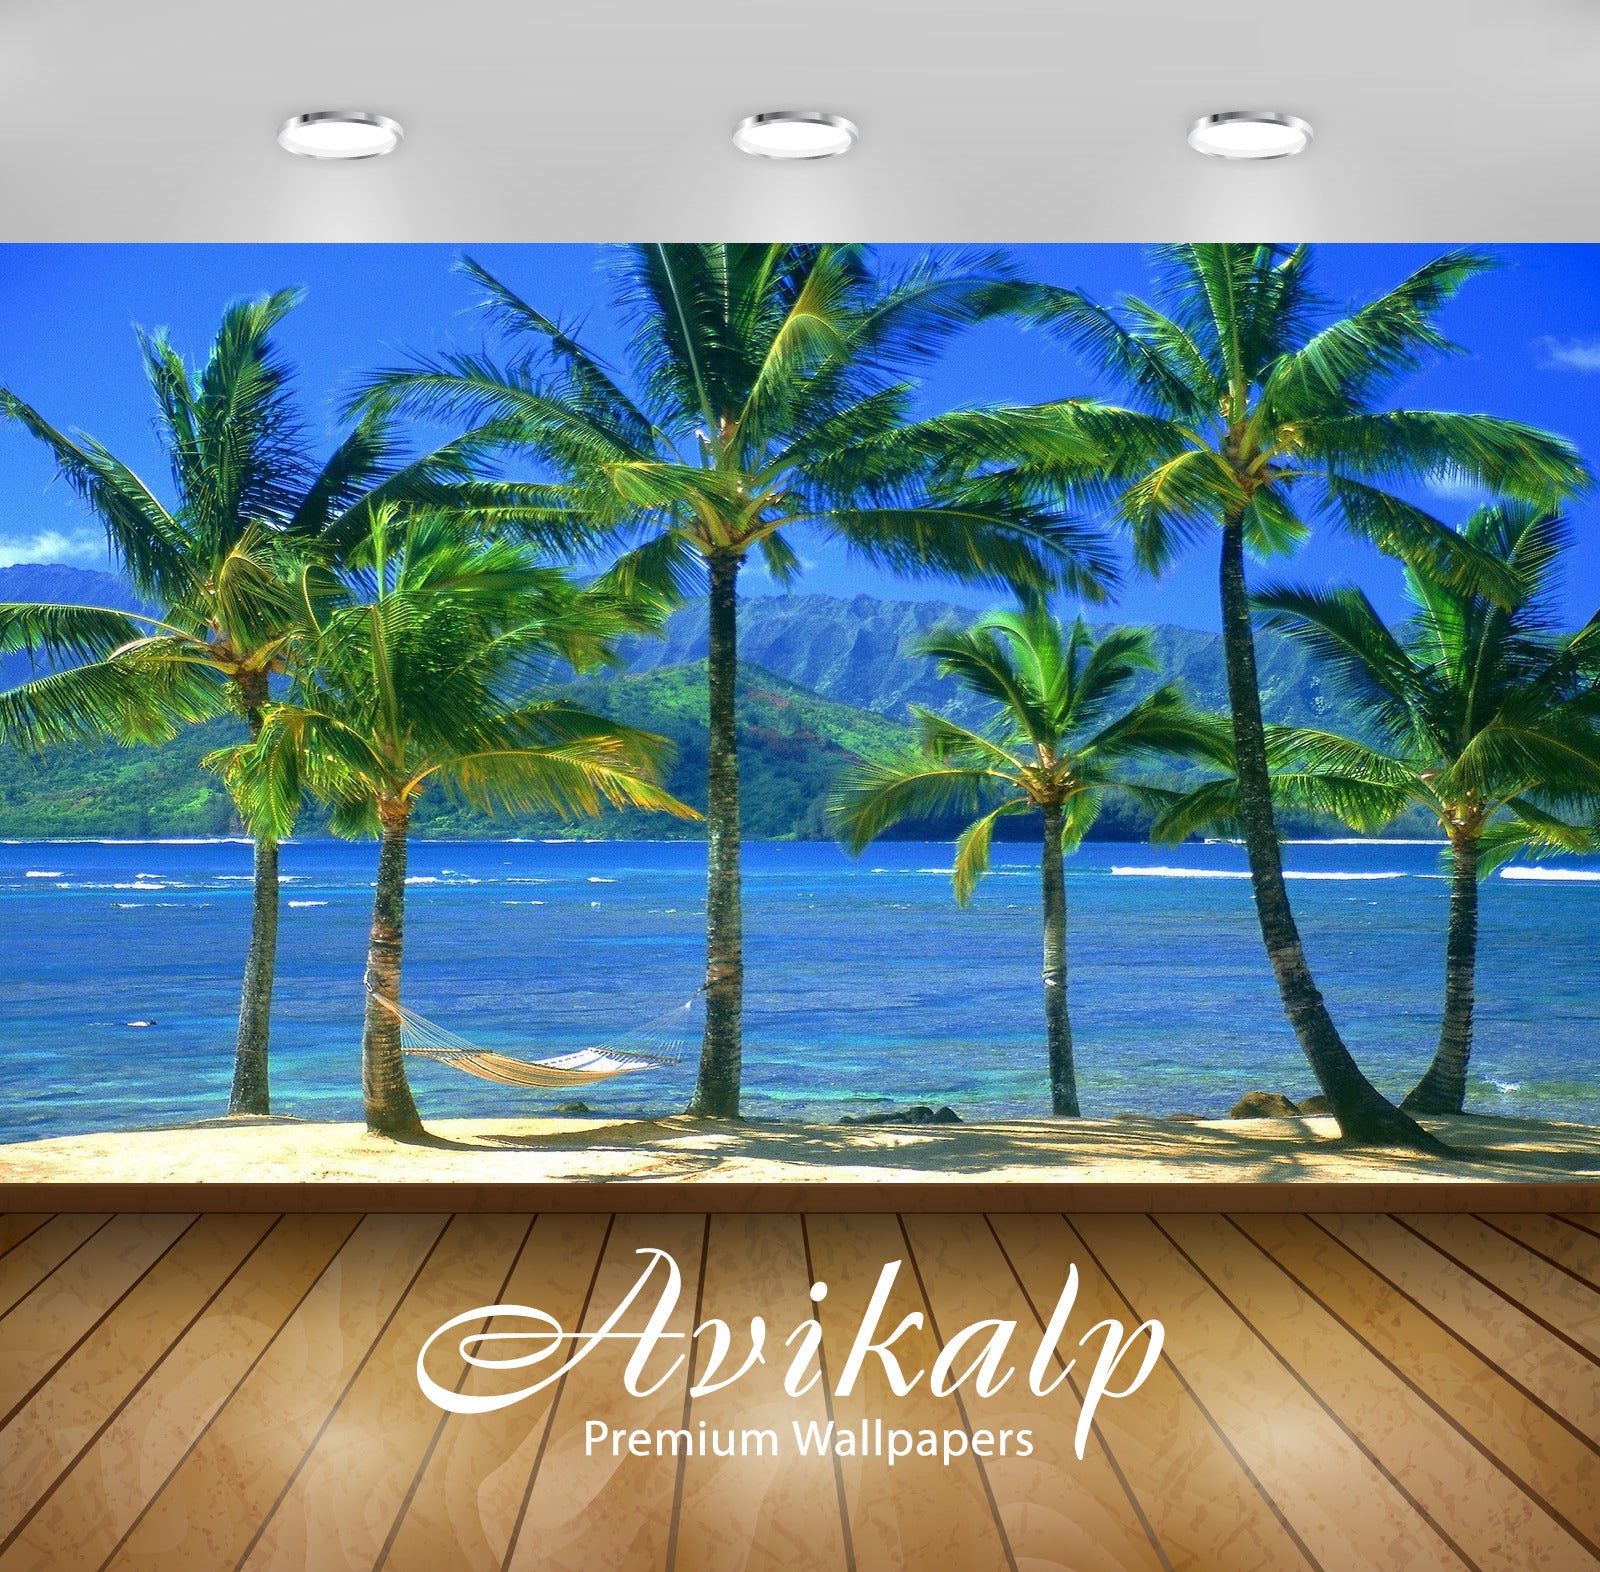 Avikalp Exclusive Awi1362 Amazing Beach View Full HD Wallpapers for Living room, Hall, Kids Room, Ki